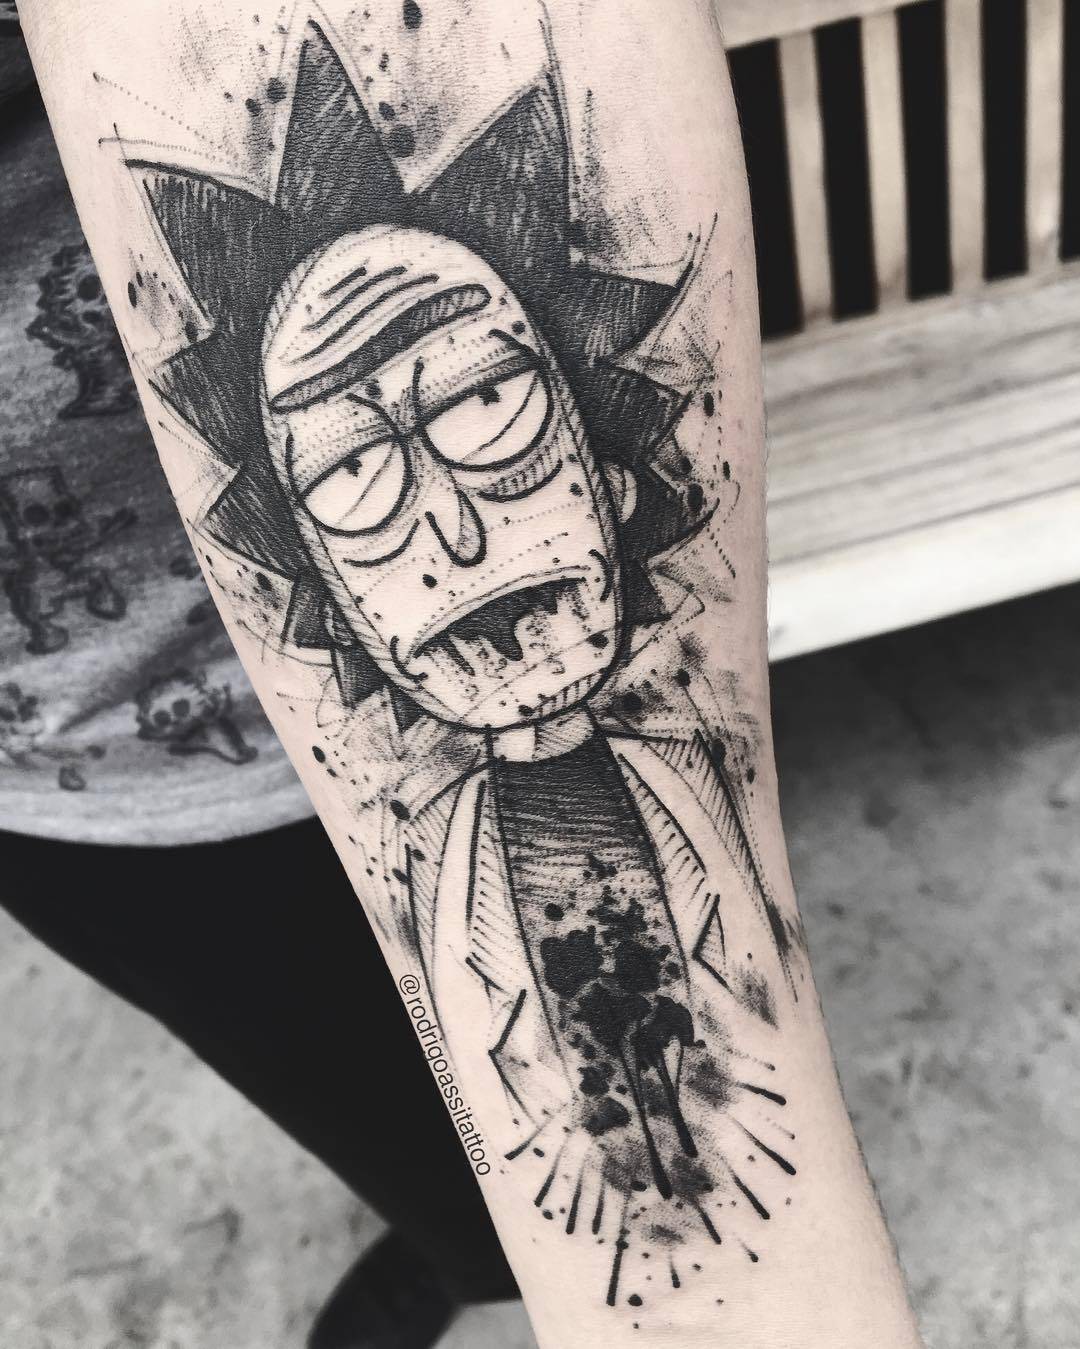 The Tattoo Shop on Twitter Wicked Rick and Morty piece by bluamaranth   tattooshop thetattooshop tattooshopsupplies thetattooshopsupplies  rickandmortytattoo rickandmorty neotrad newtrad newtraditionaltattoo  neotradtattoo httpstco 